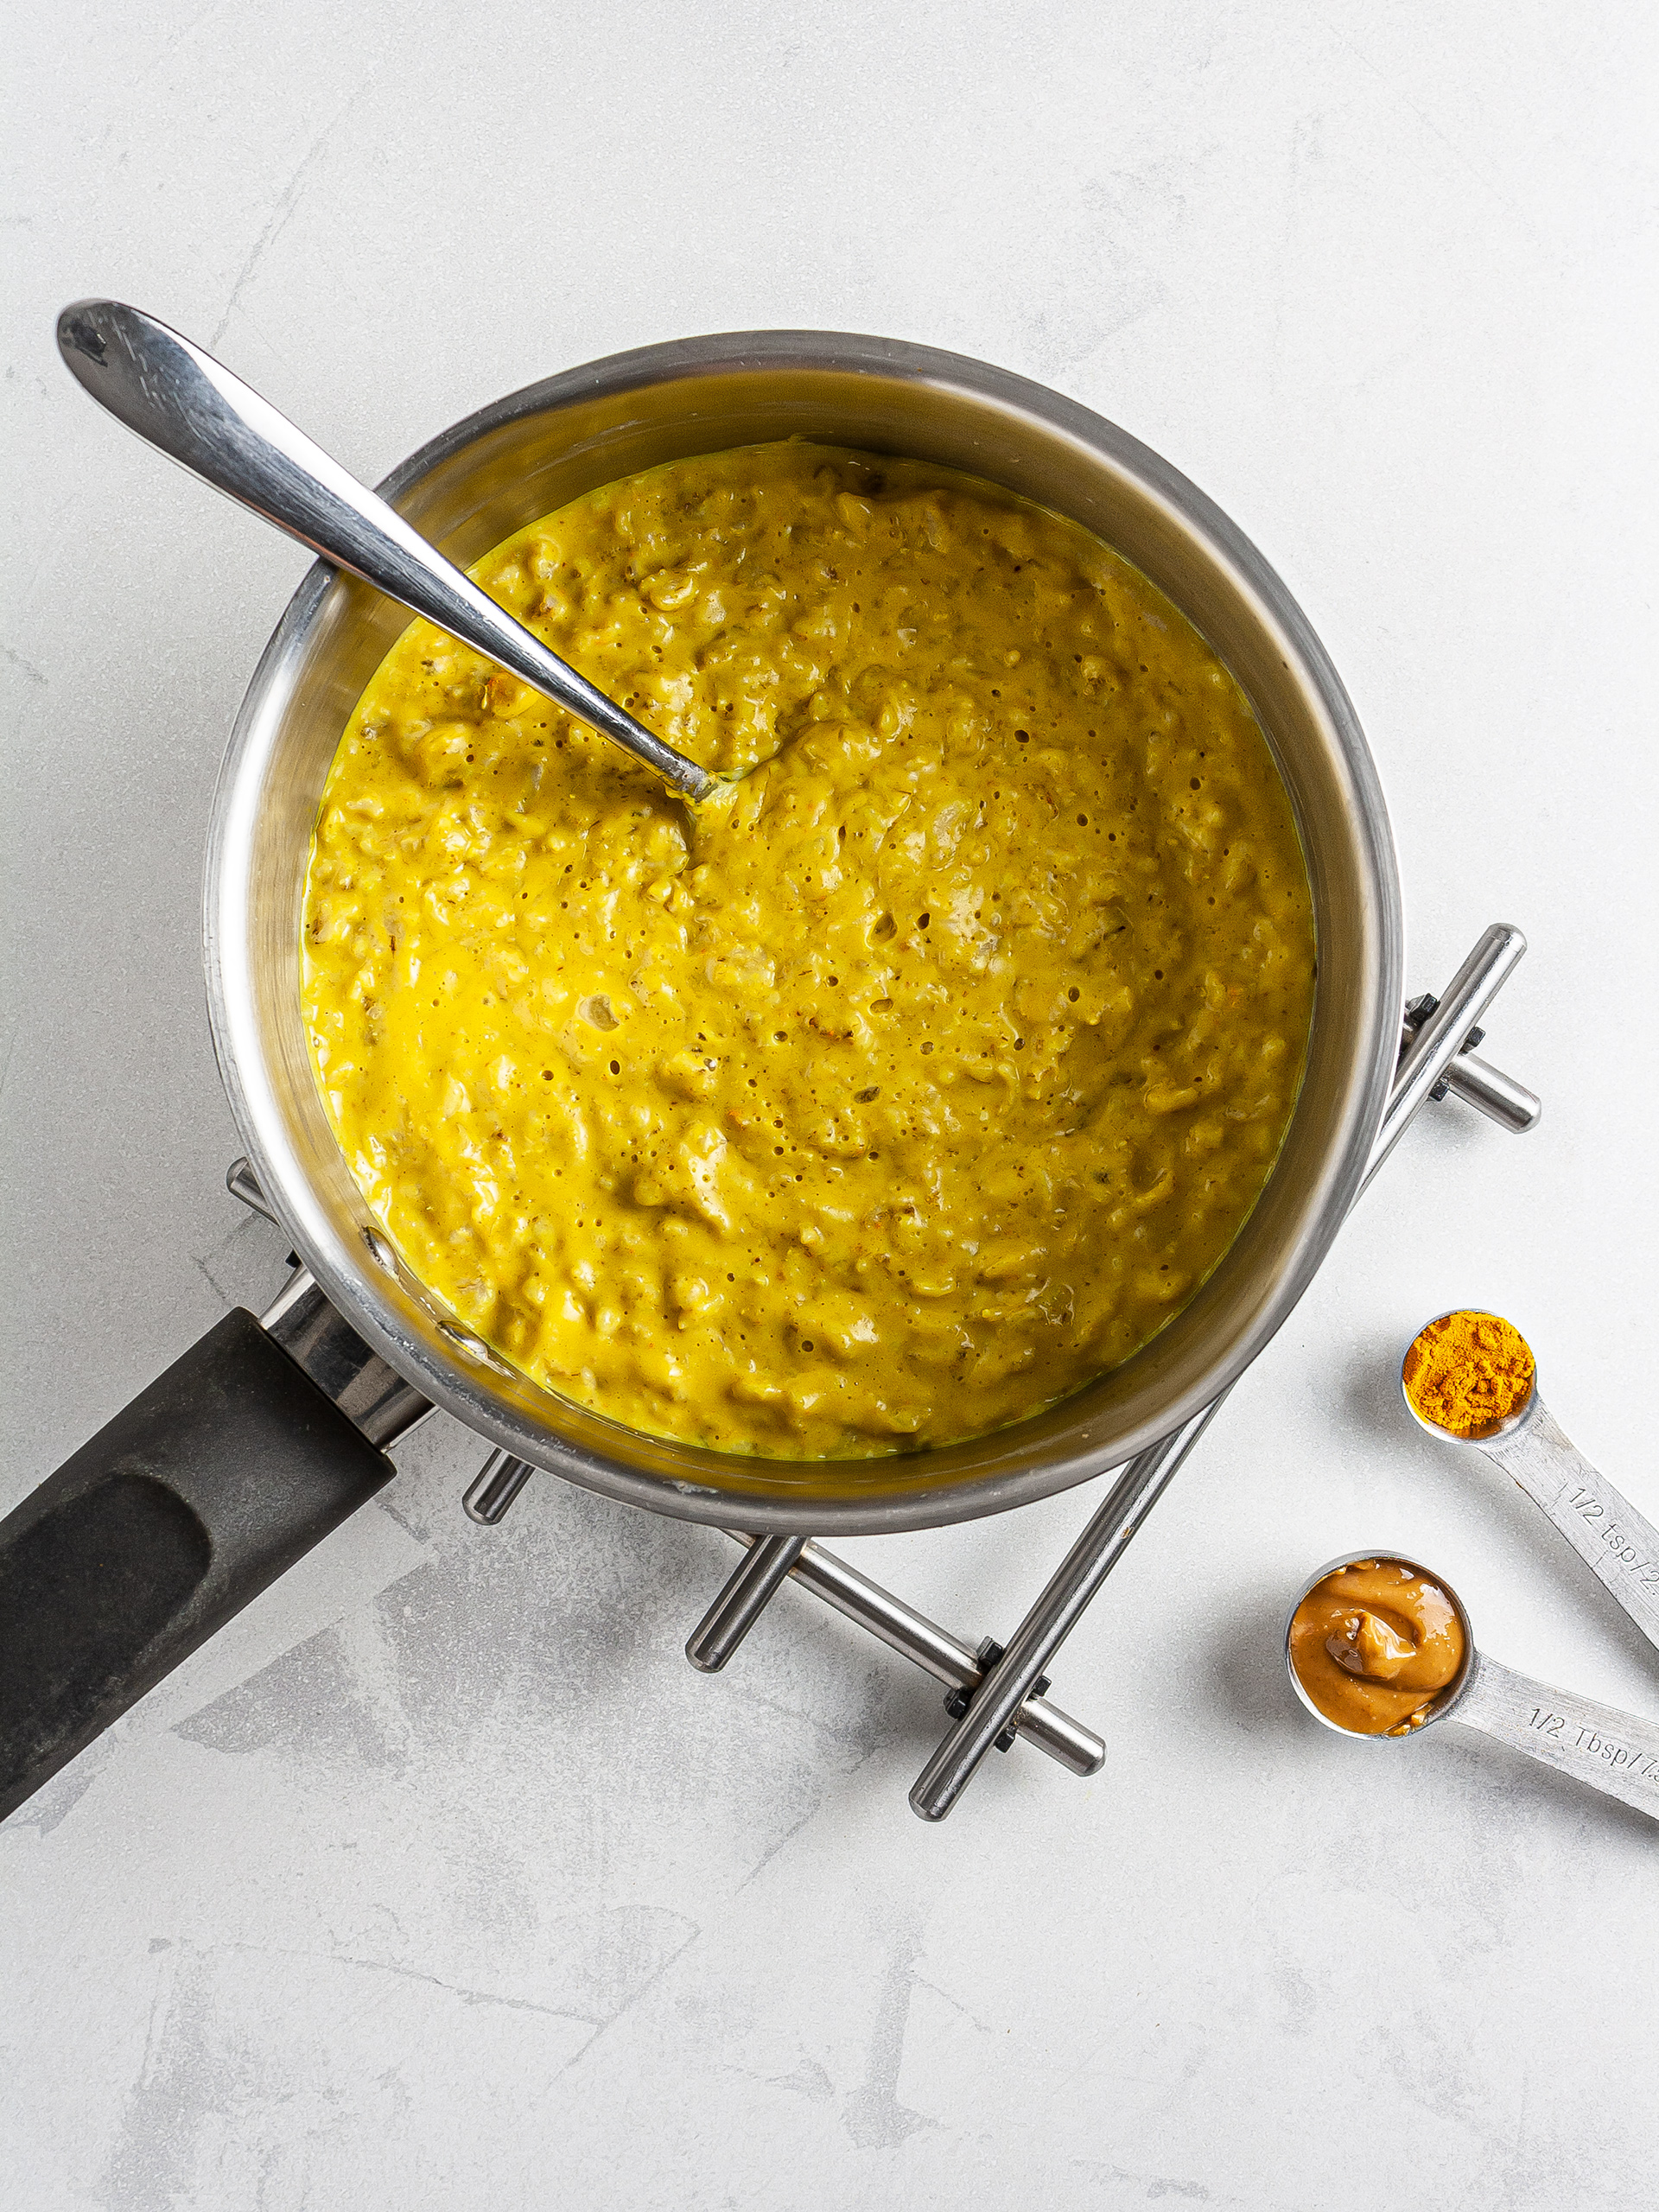 Turmeric and almond butter in the porridge